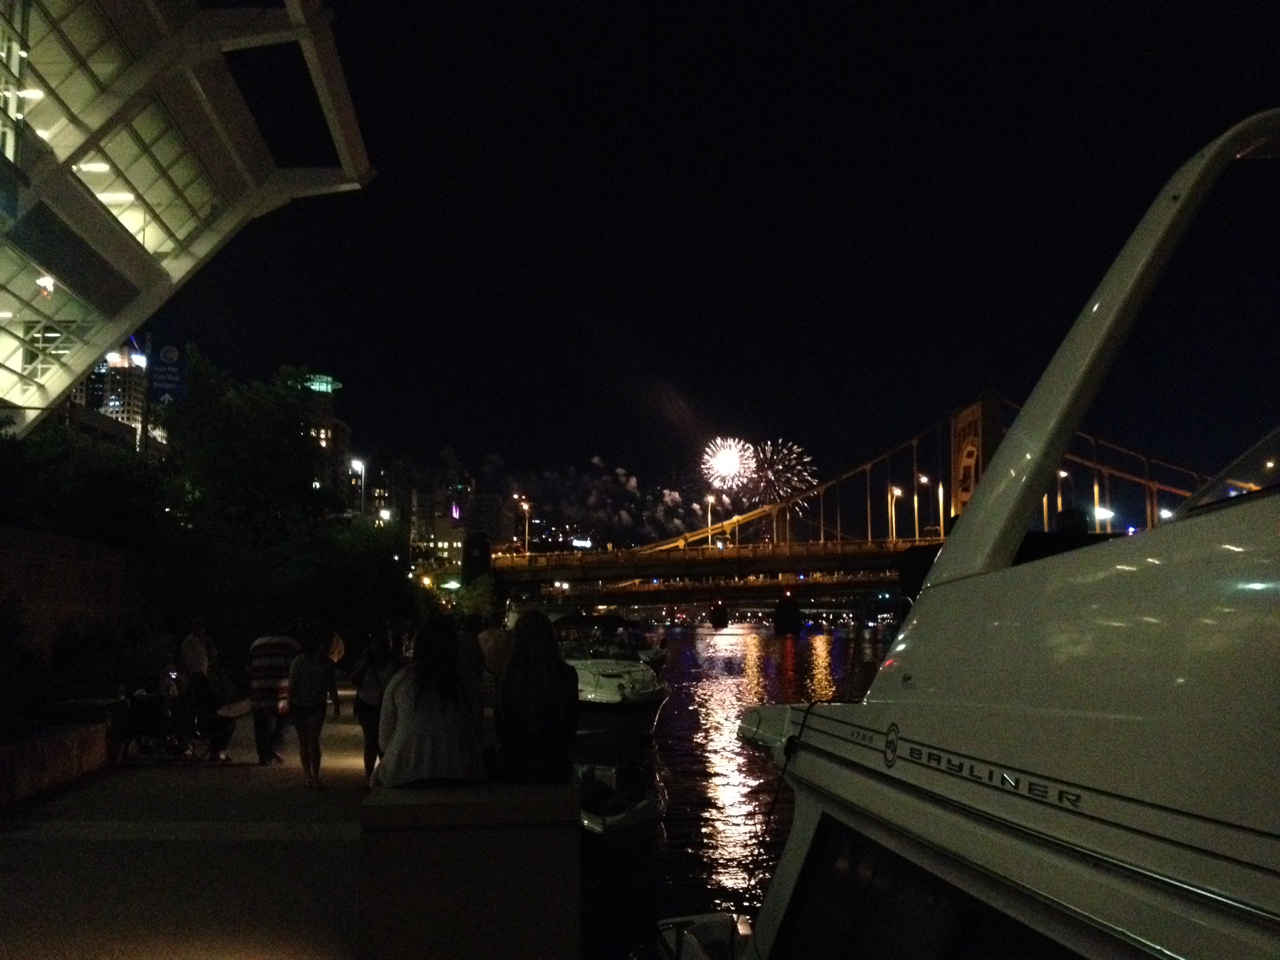 Fireworks over Confluence Point Park, 4th of July, as seen from the docks by the DLLCC on the Allegheny river.